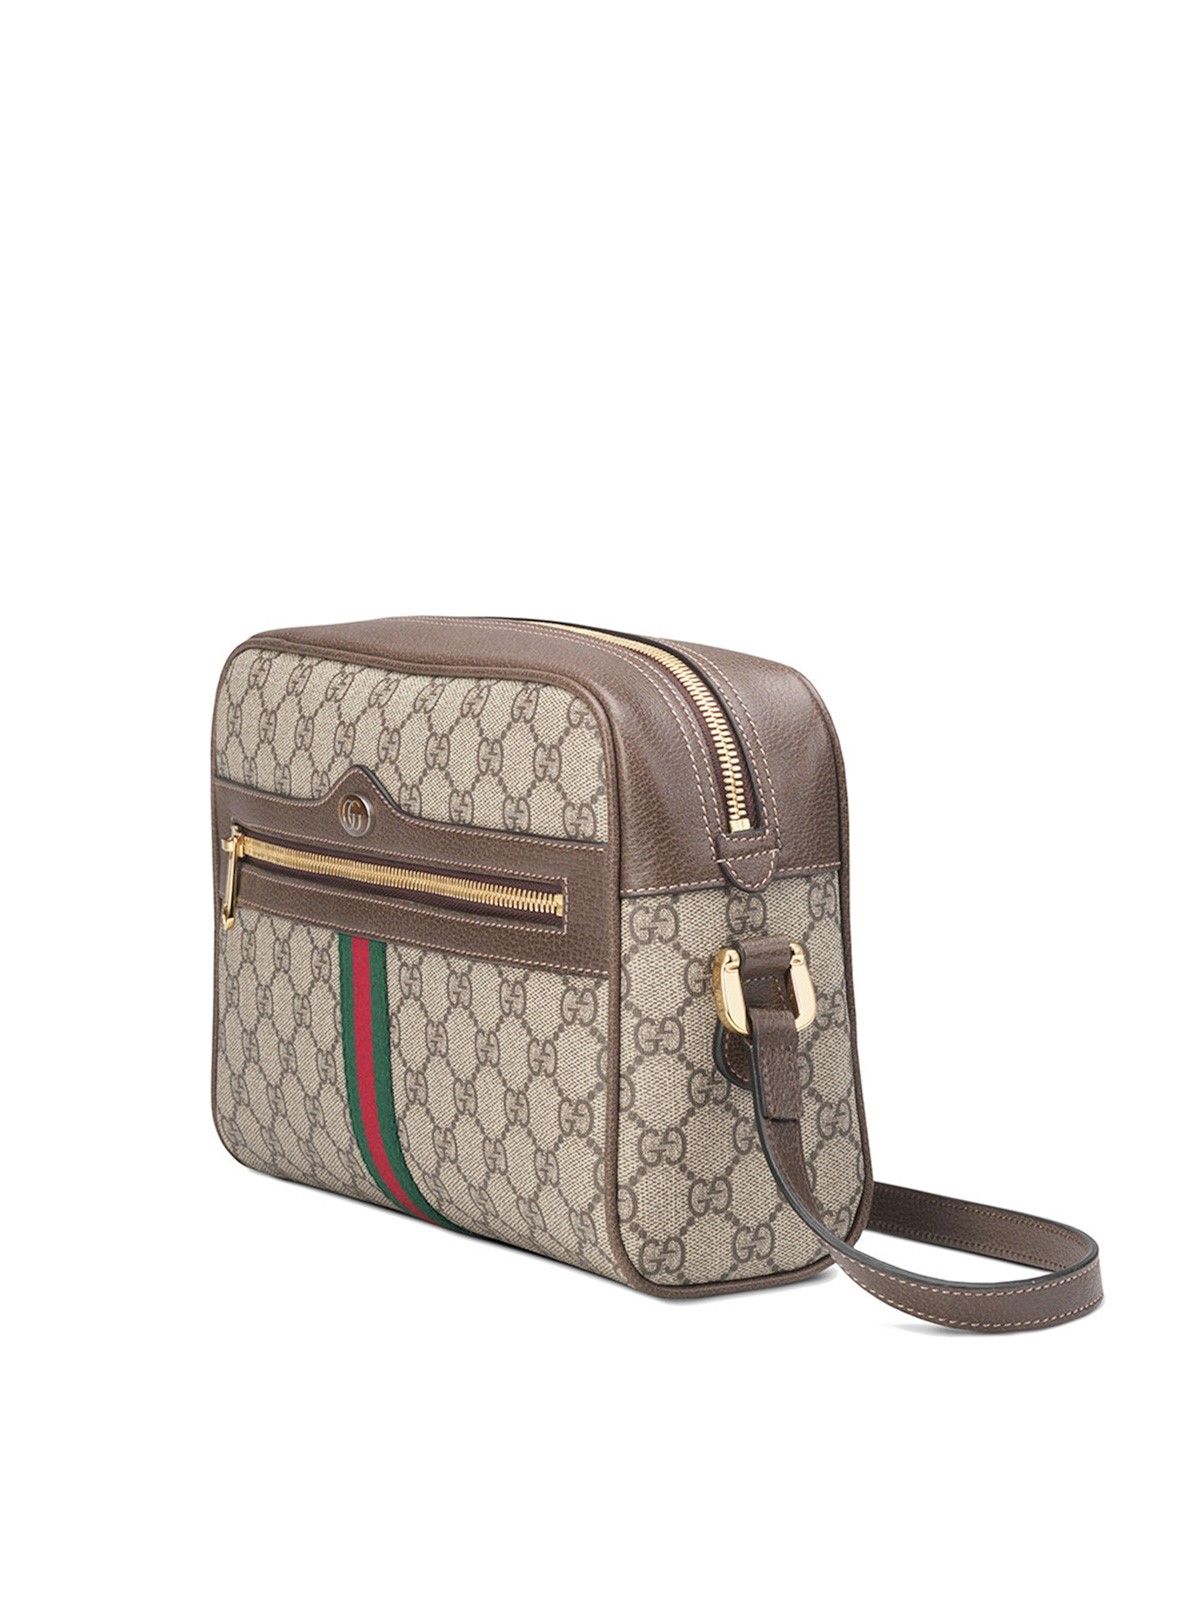 gucci OPHIDIA SHOULDER BAG available on 0 - 22340